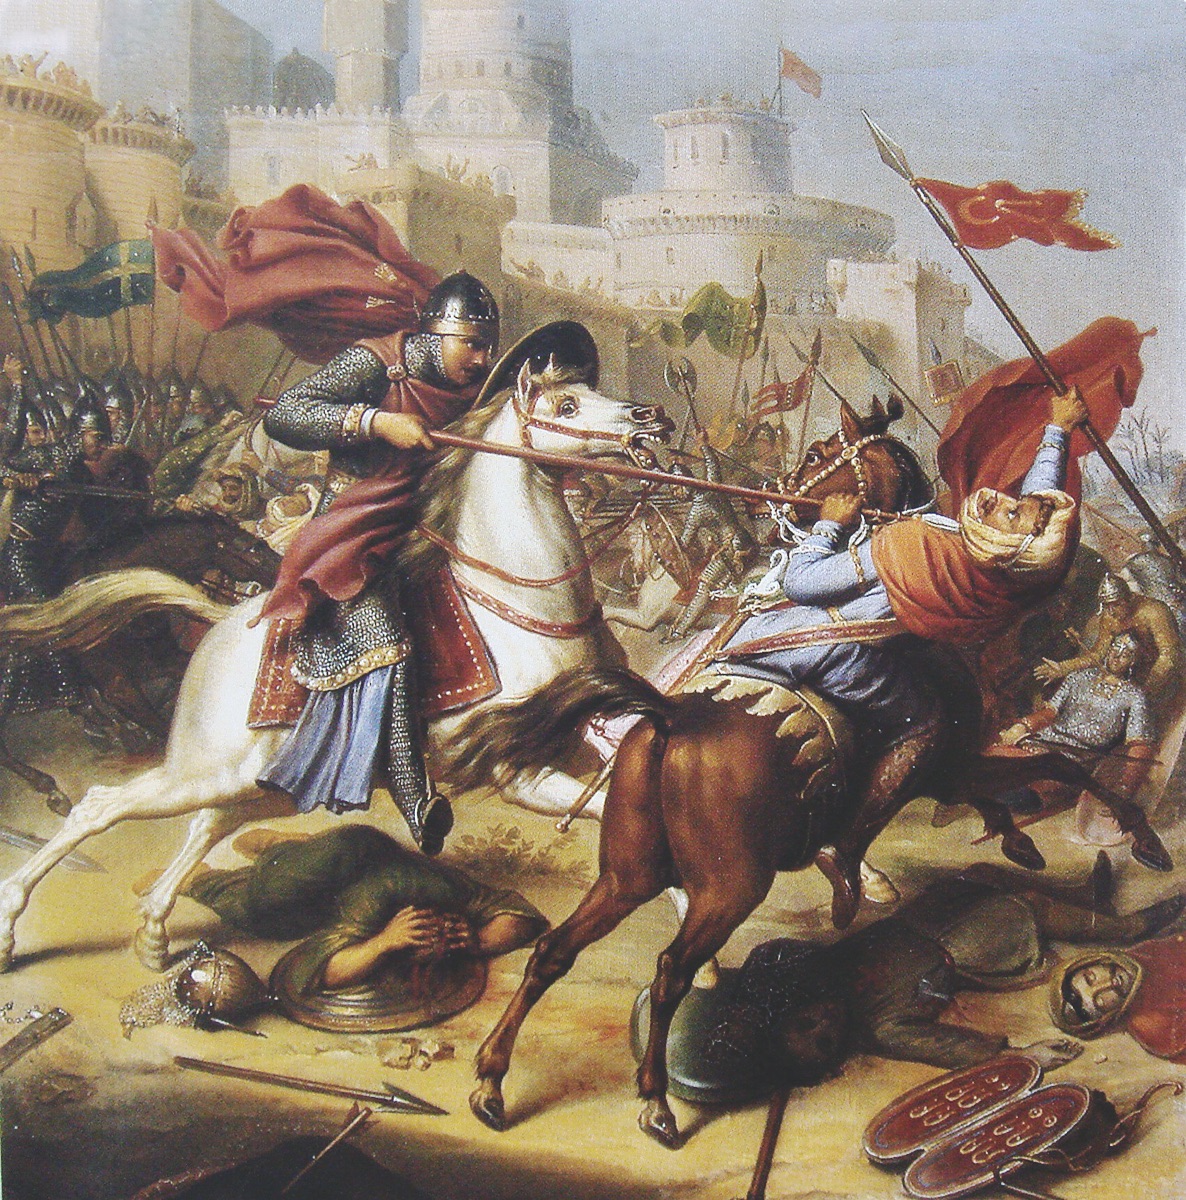  The Crusaders exploited Kerbogha’s slow reaction to rout his forces. (Chateau De Versailles)